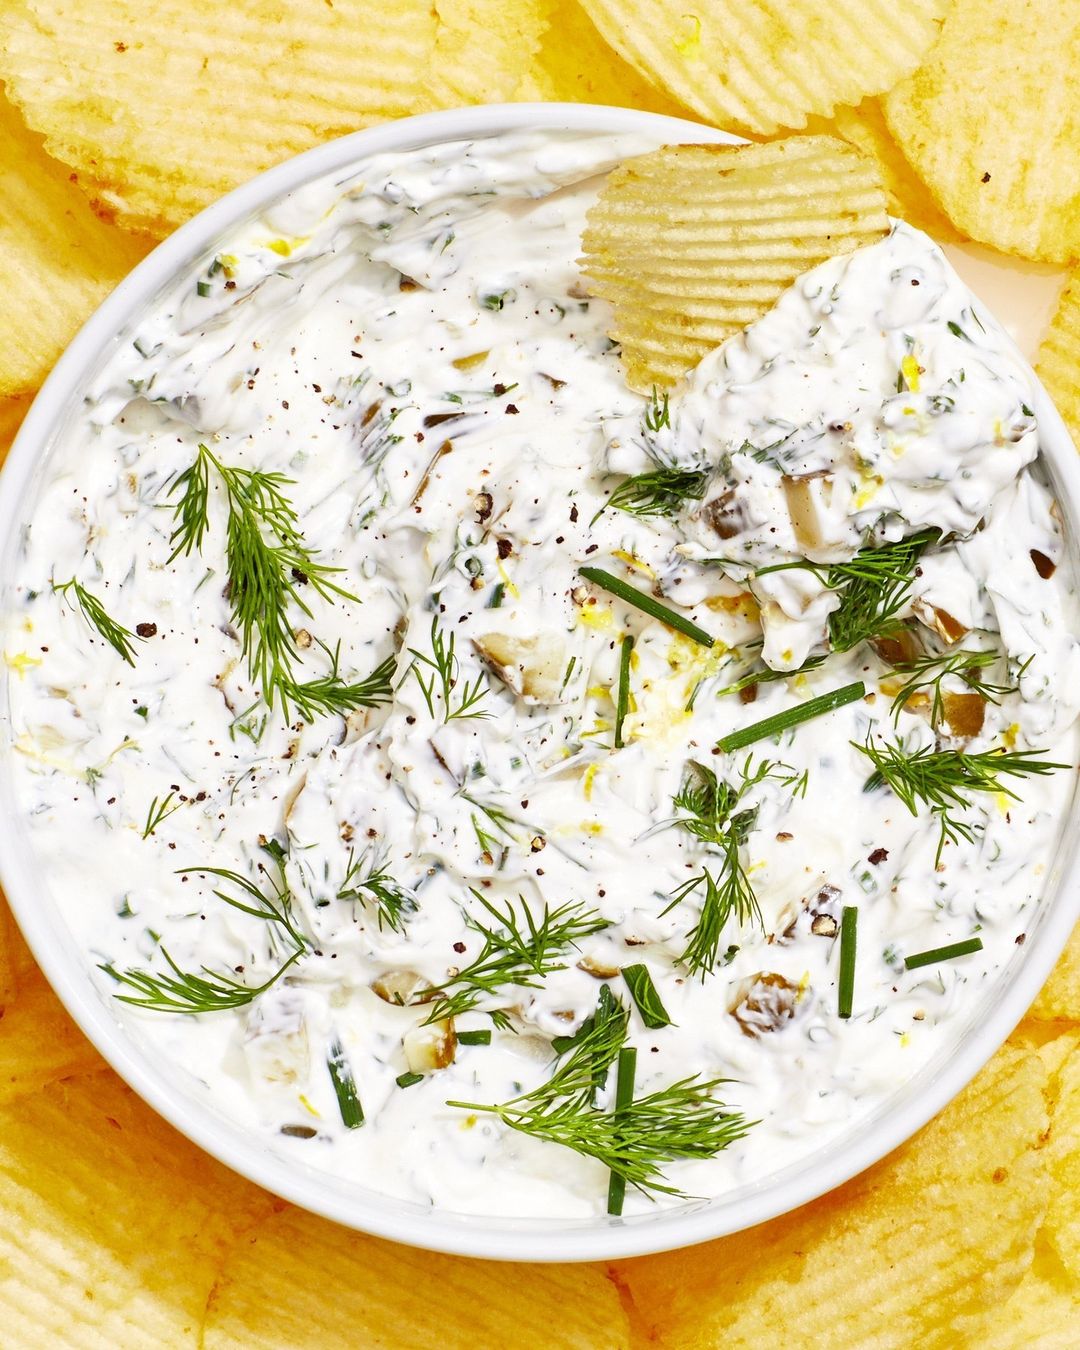 Recipes for Healthy and Delicious Dips  ...